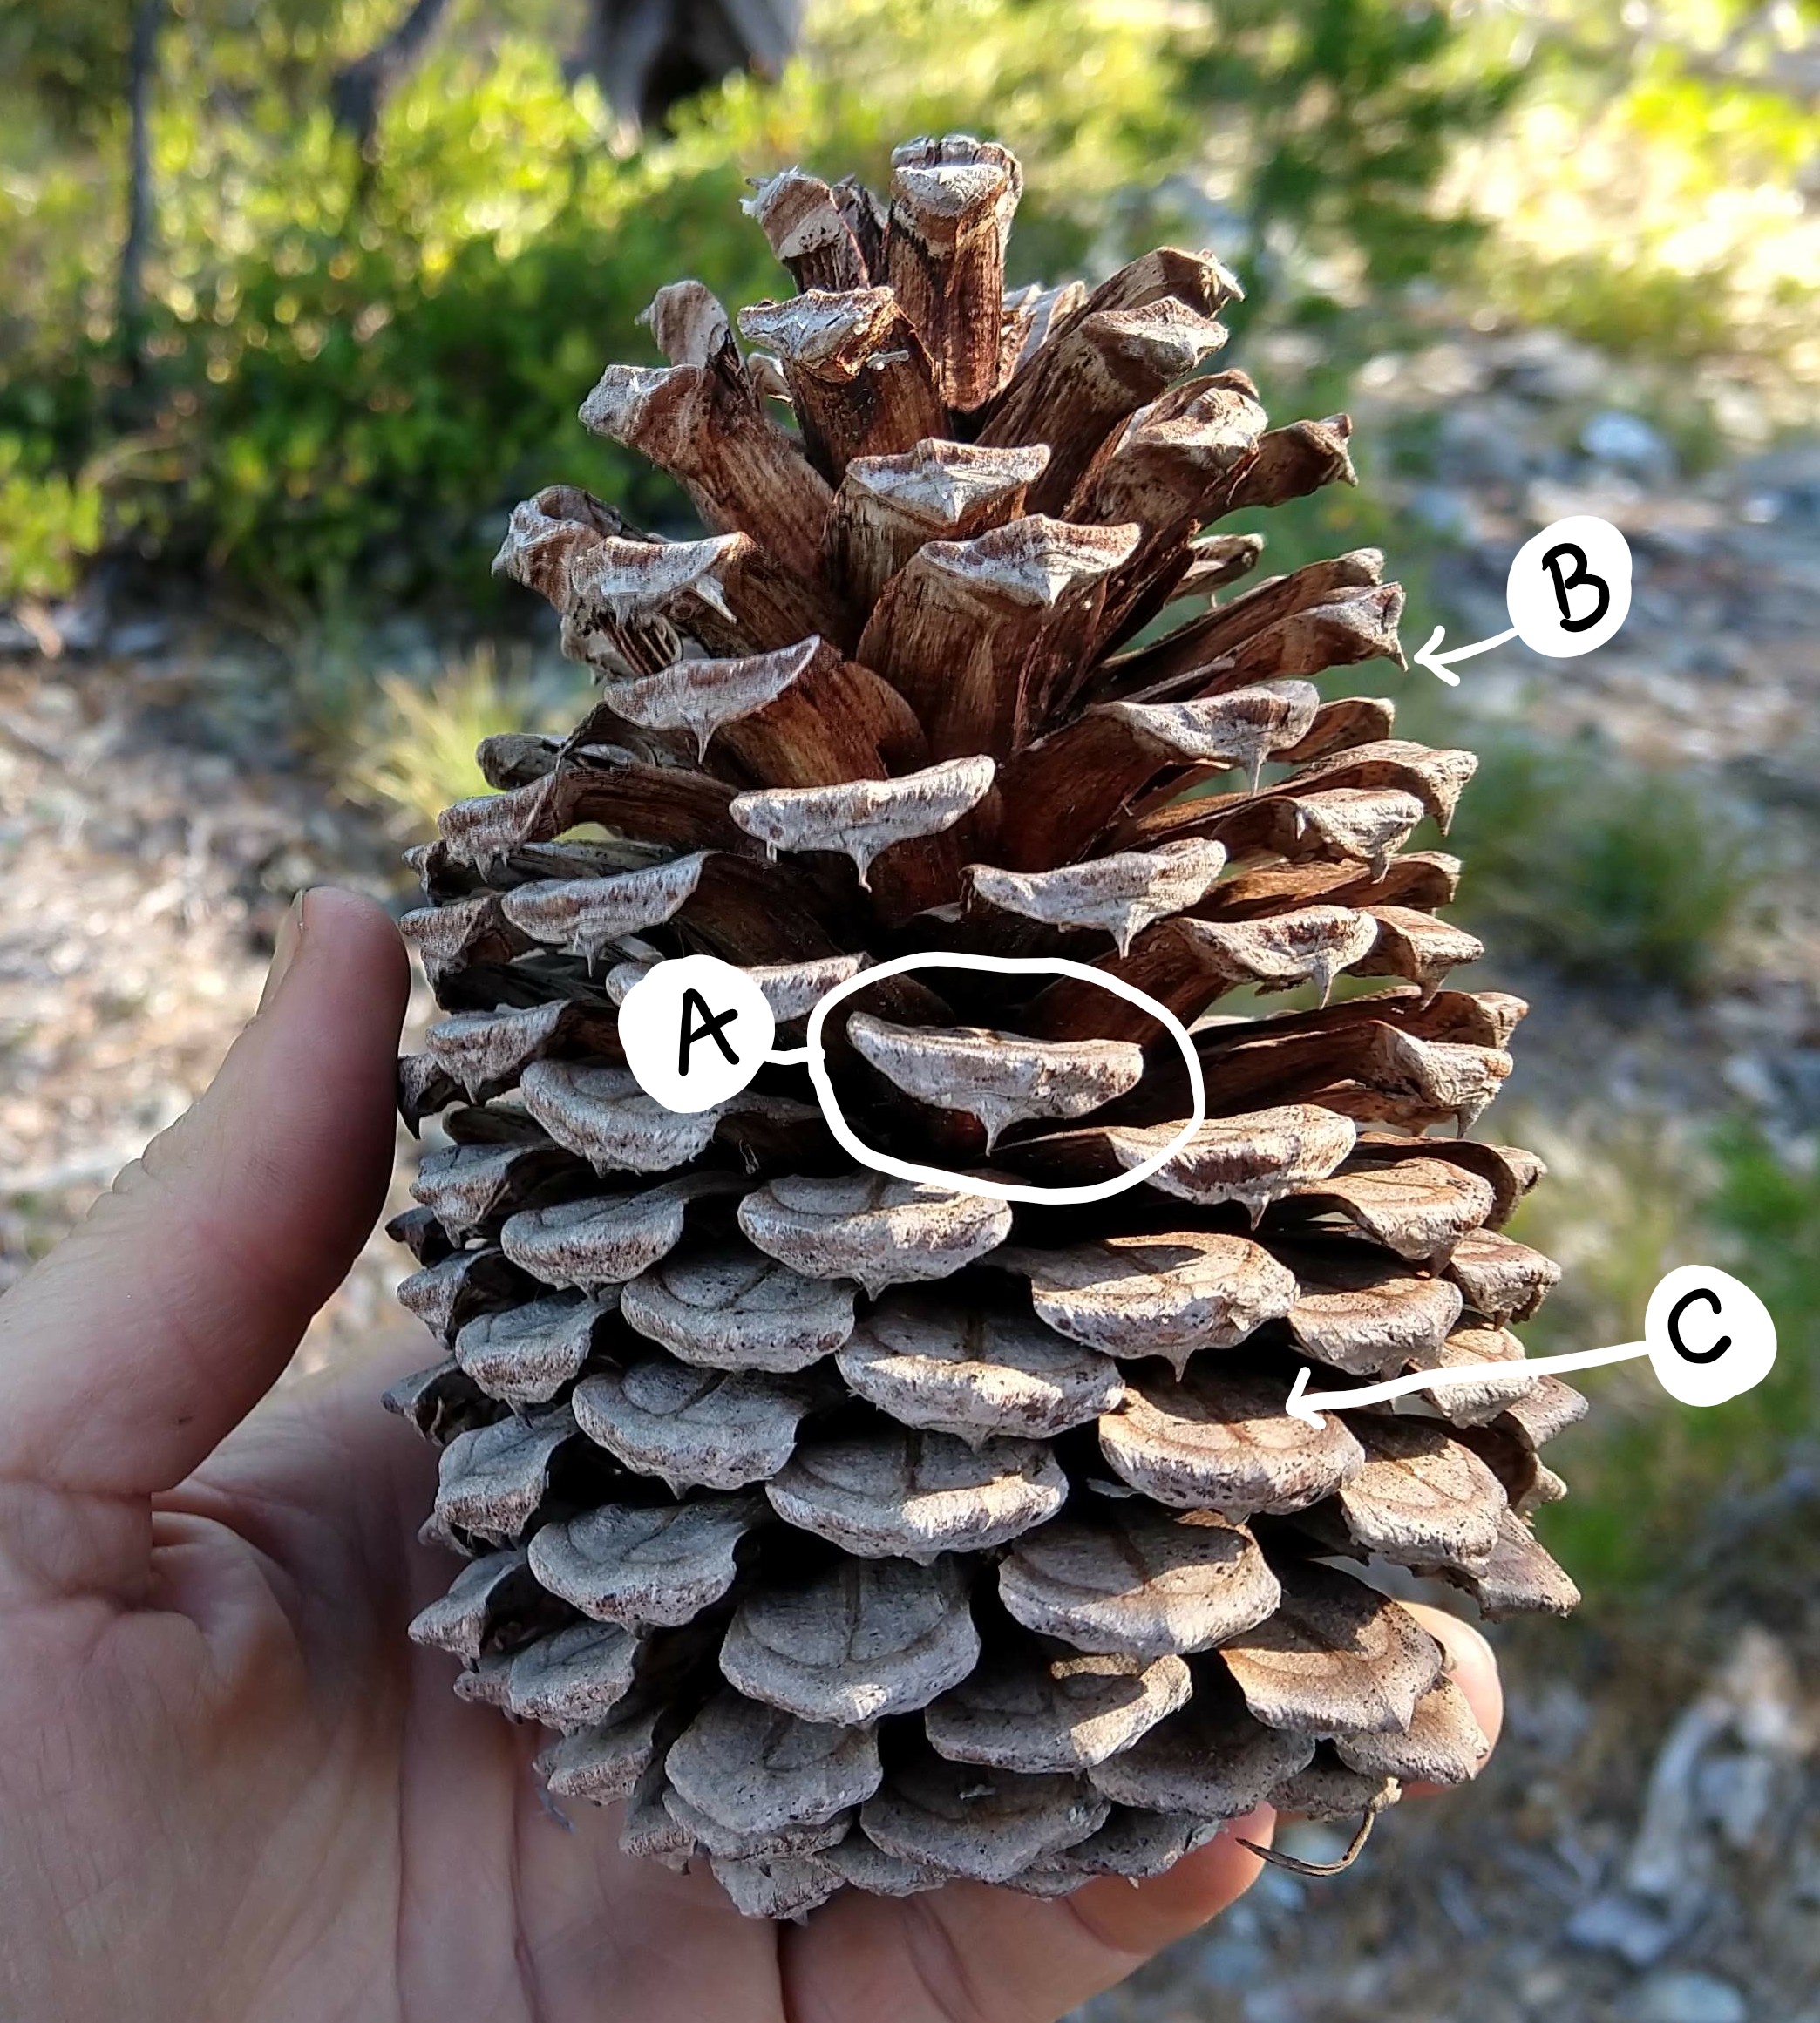 A jefferey pine megastrobilus labeled with an A, B, and C